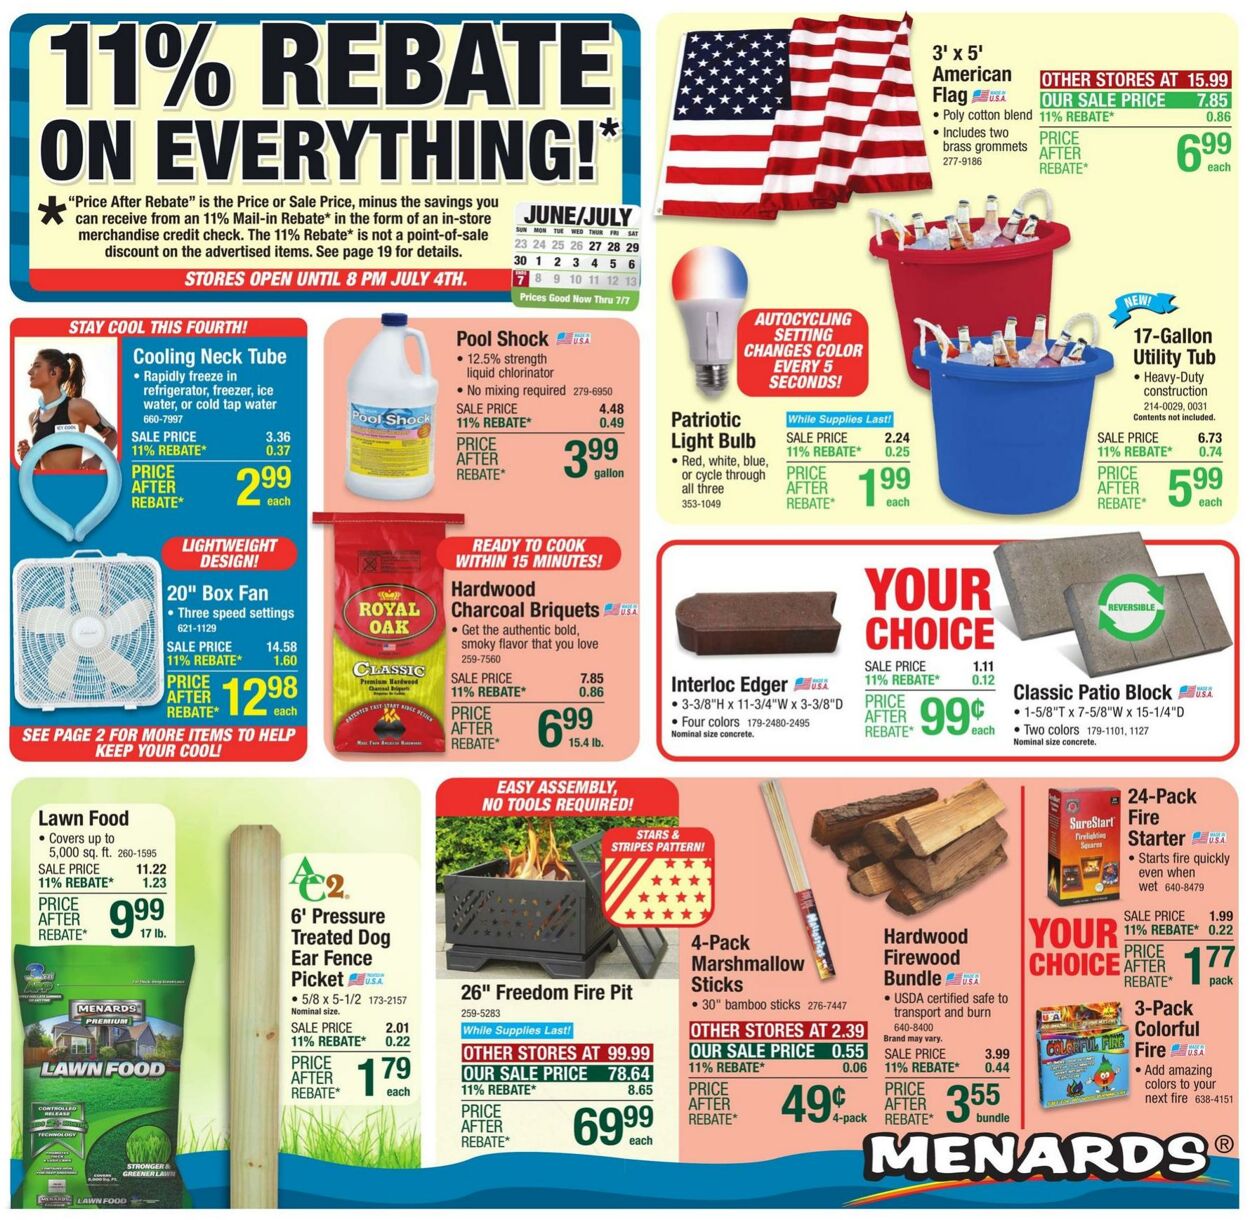 Menards Promotional weekly ads